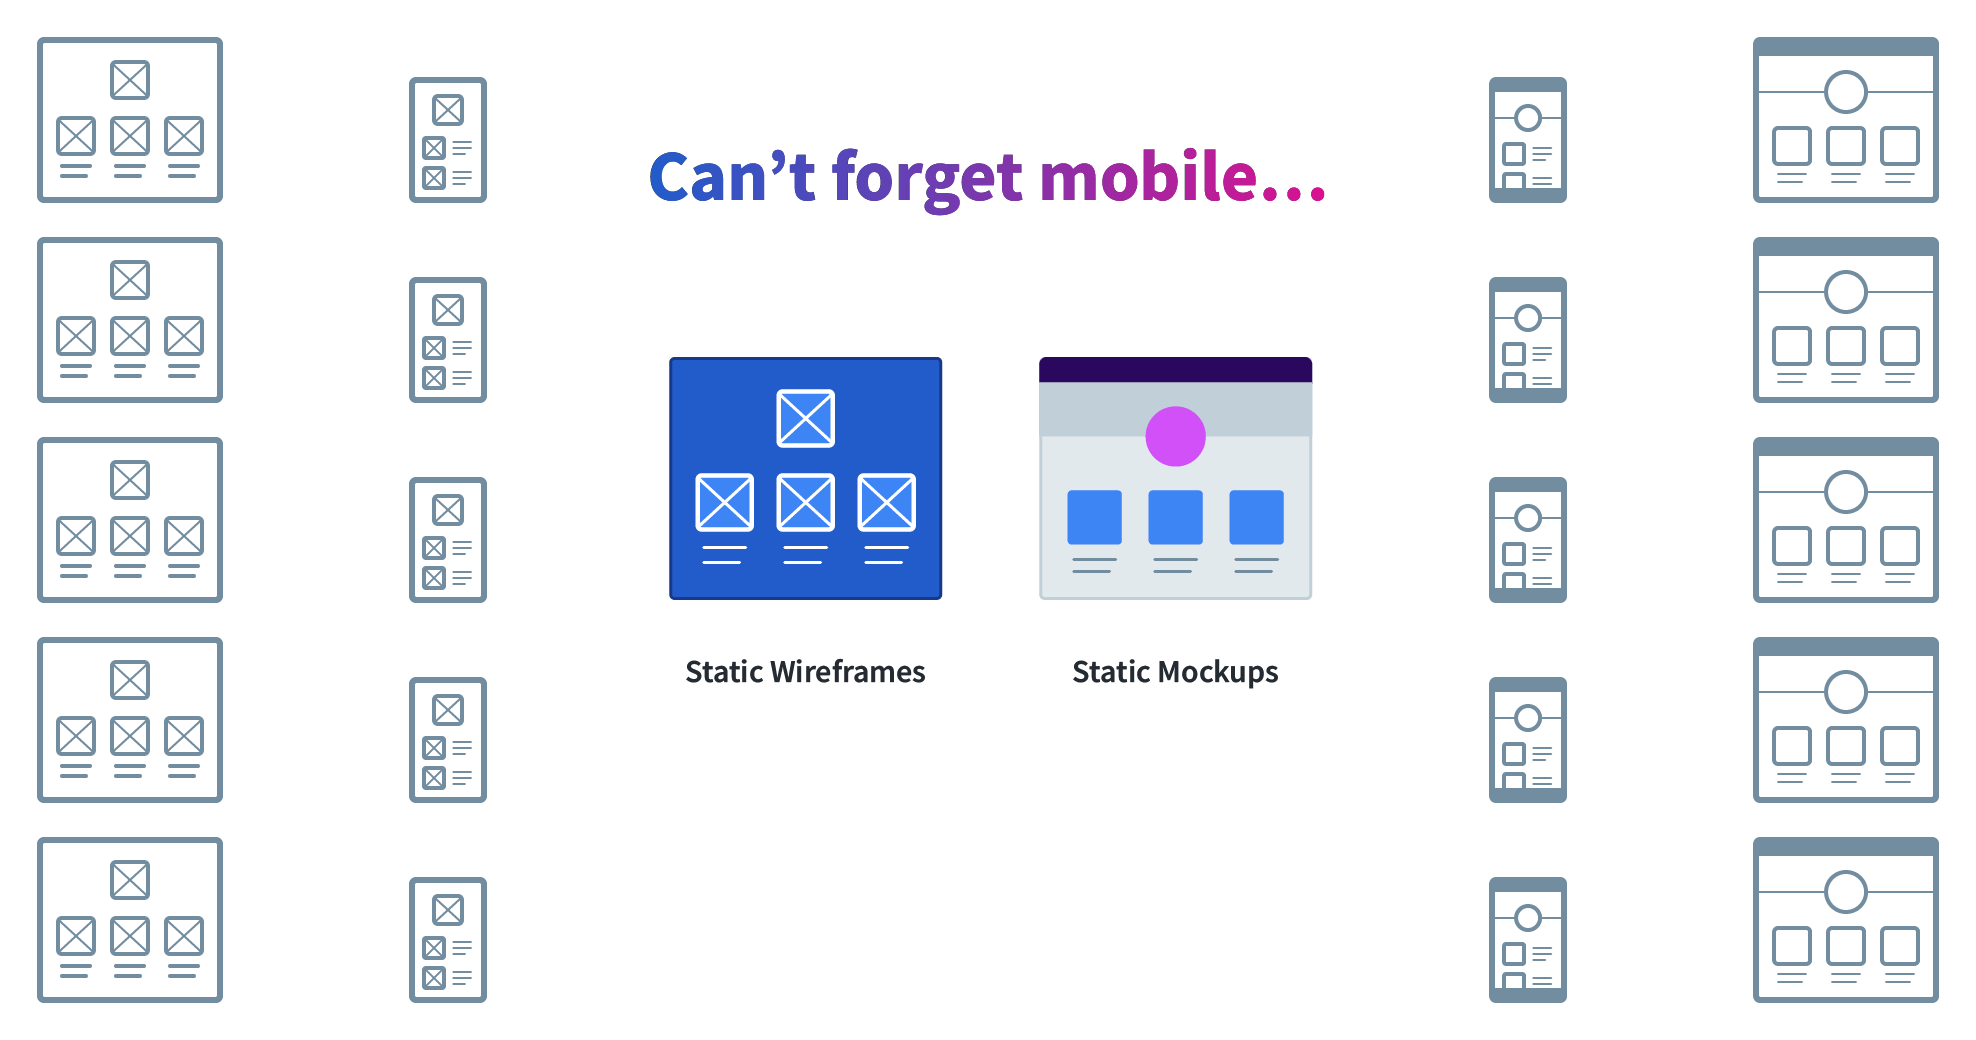 Five mobile wireframe and mockup icons are added to the previous image. The title changes to say, 'Can’t forget mobile'.